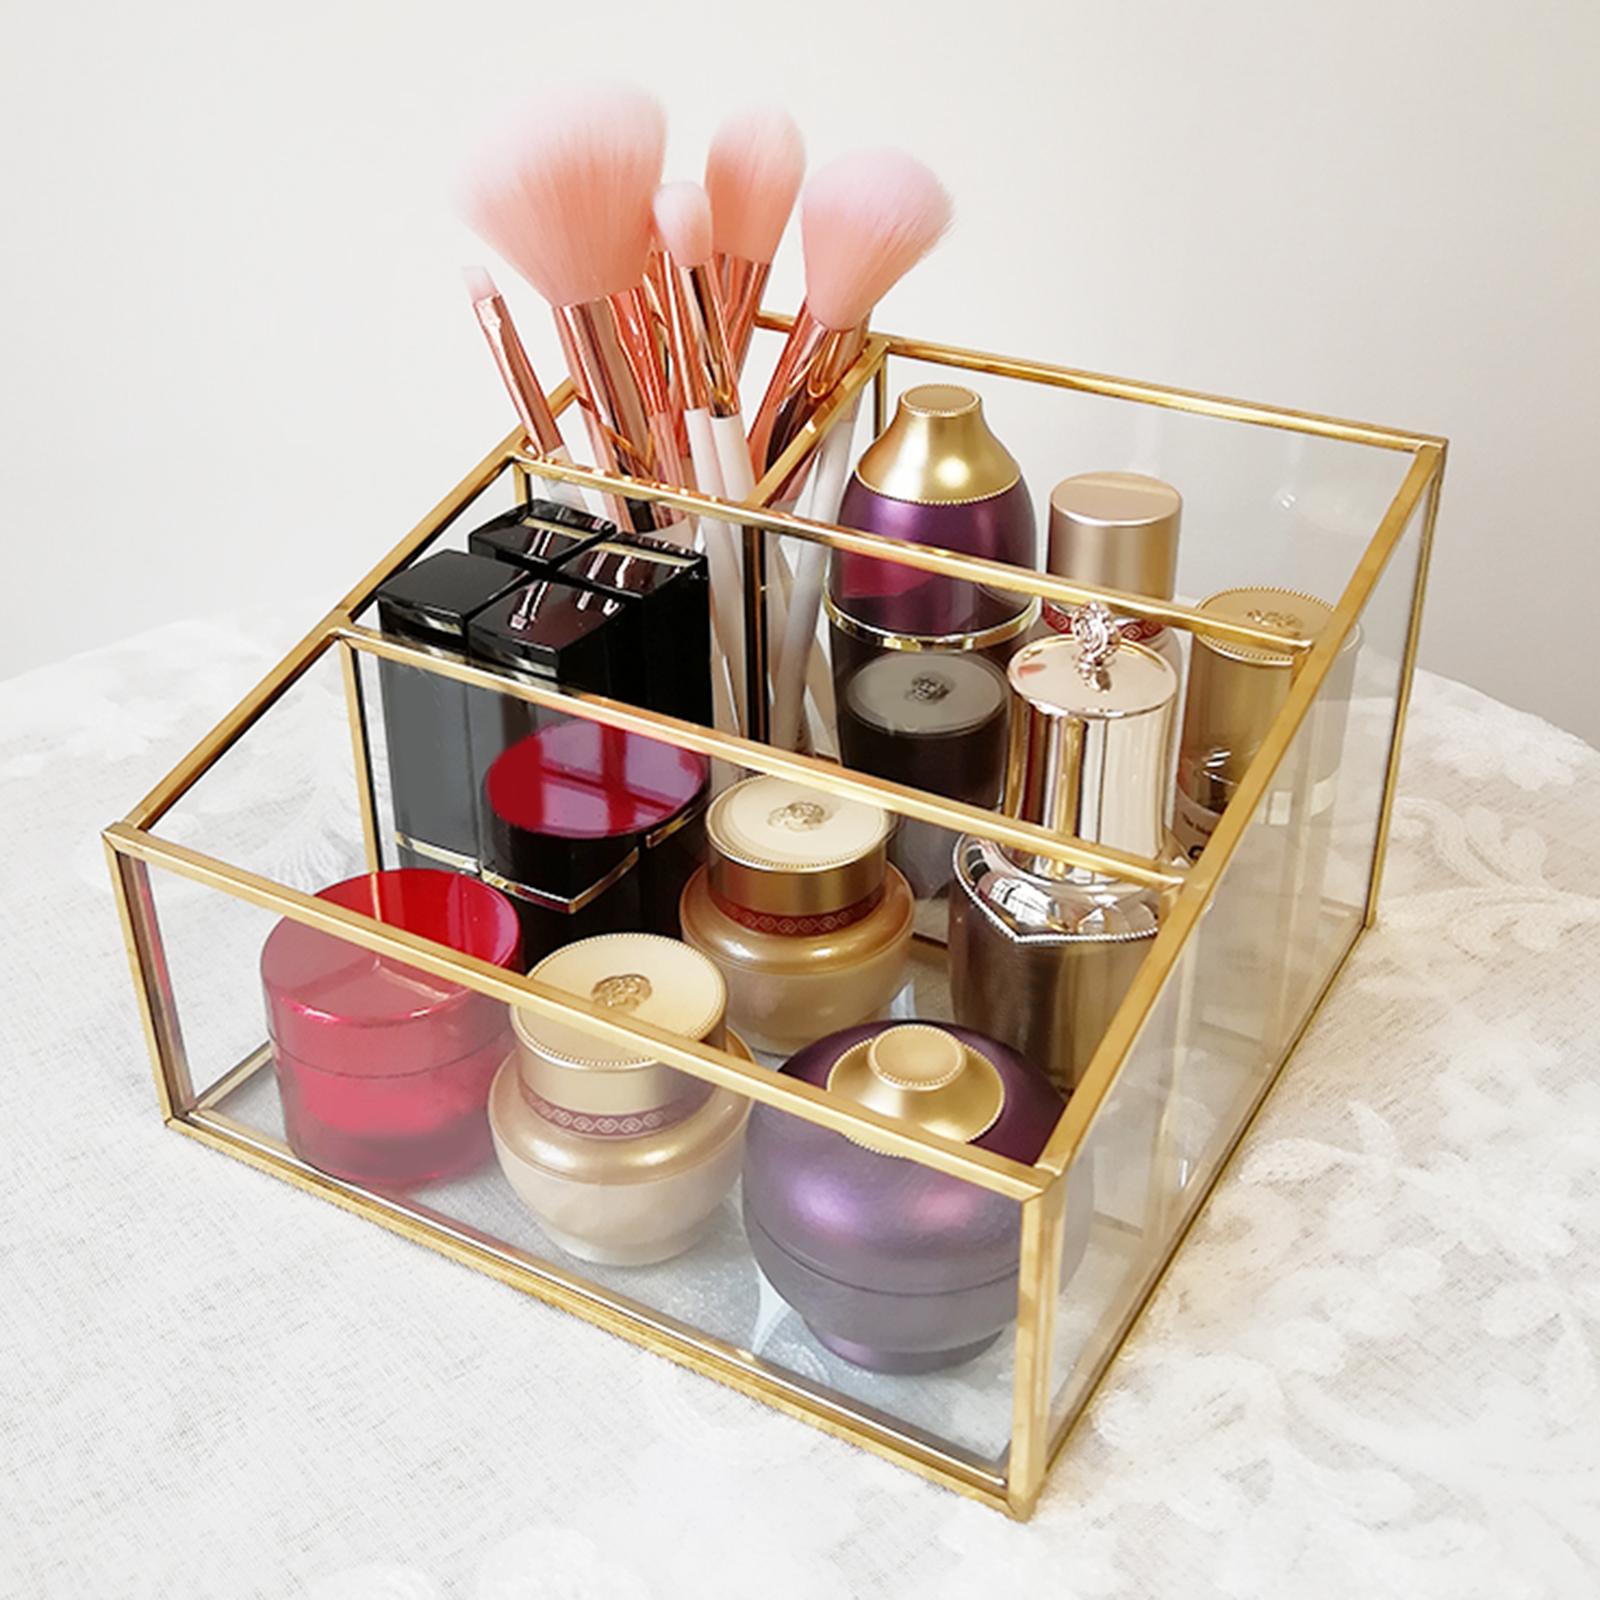 Makeup Organizer, Clear Cosmetic Storage Display Case with 4 Compartments, for Jewelry, Makeup Brushes, Lipsticks